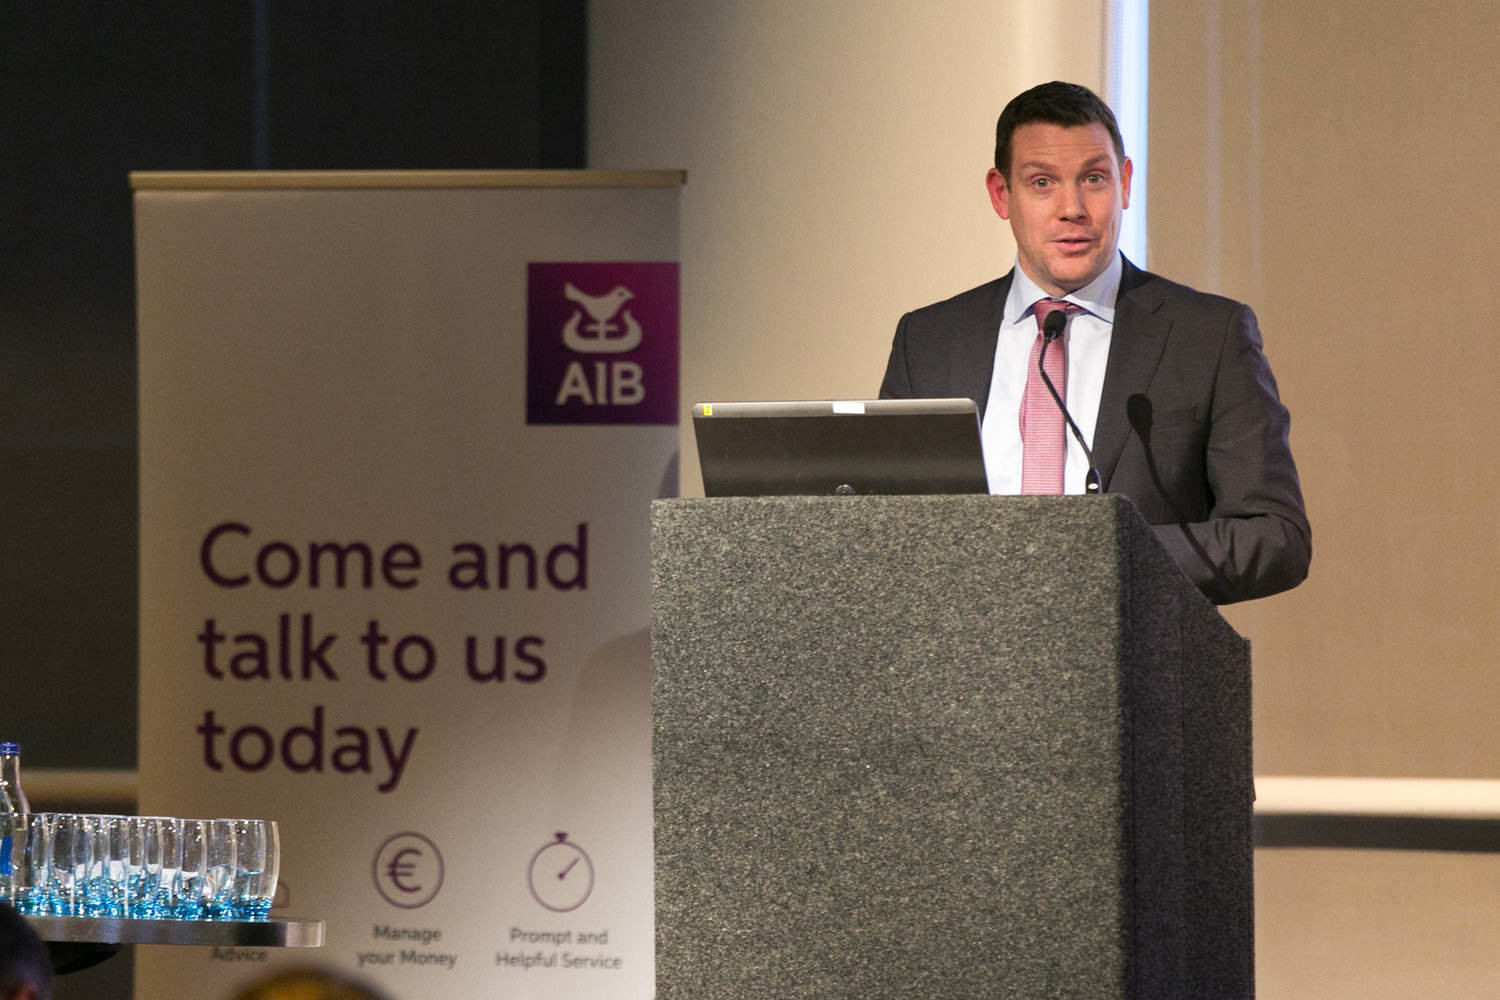 “The data we have collected allows our customers, stakeholders and industry bodies to make judgements based on sound and informative information,” said David McCarthy, Head of Hospitality & Tourism at AIB.